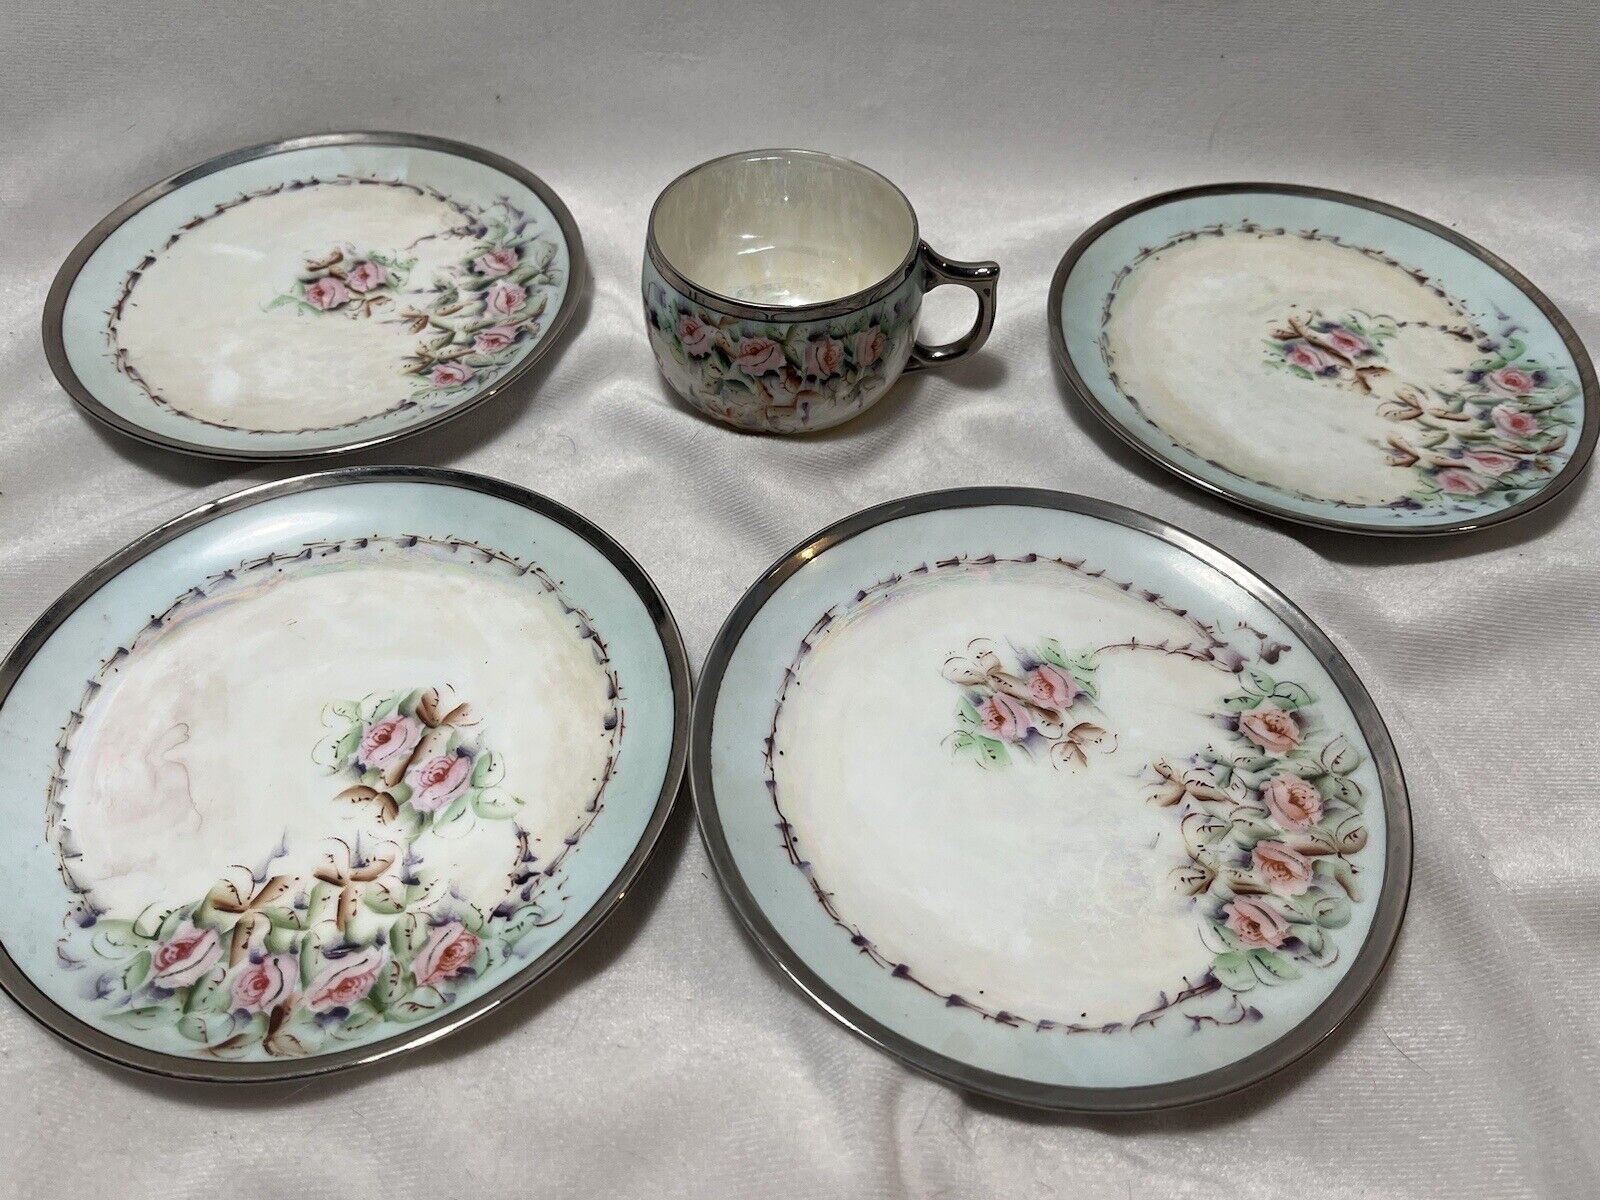 Antique Hand Painted Teacup & Saucers (5pc) Light Blue & Floral From Japan